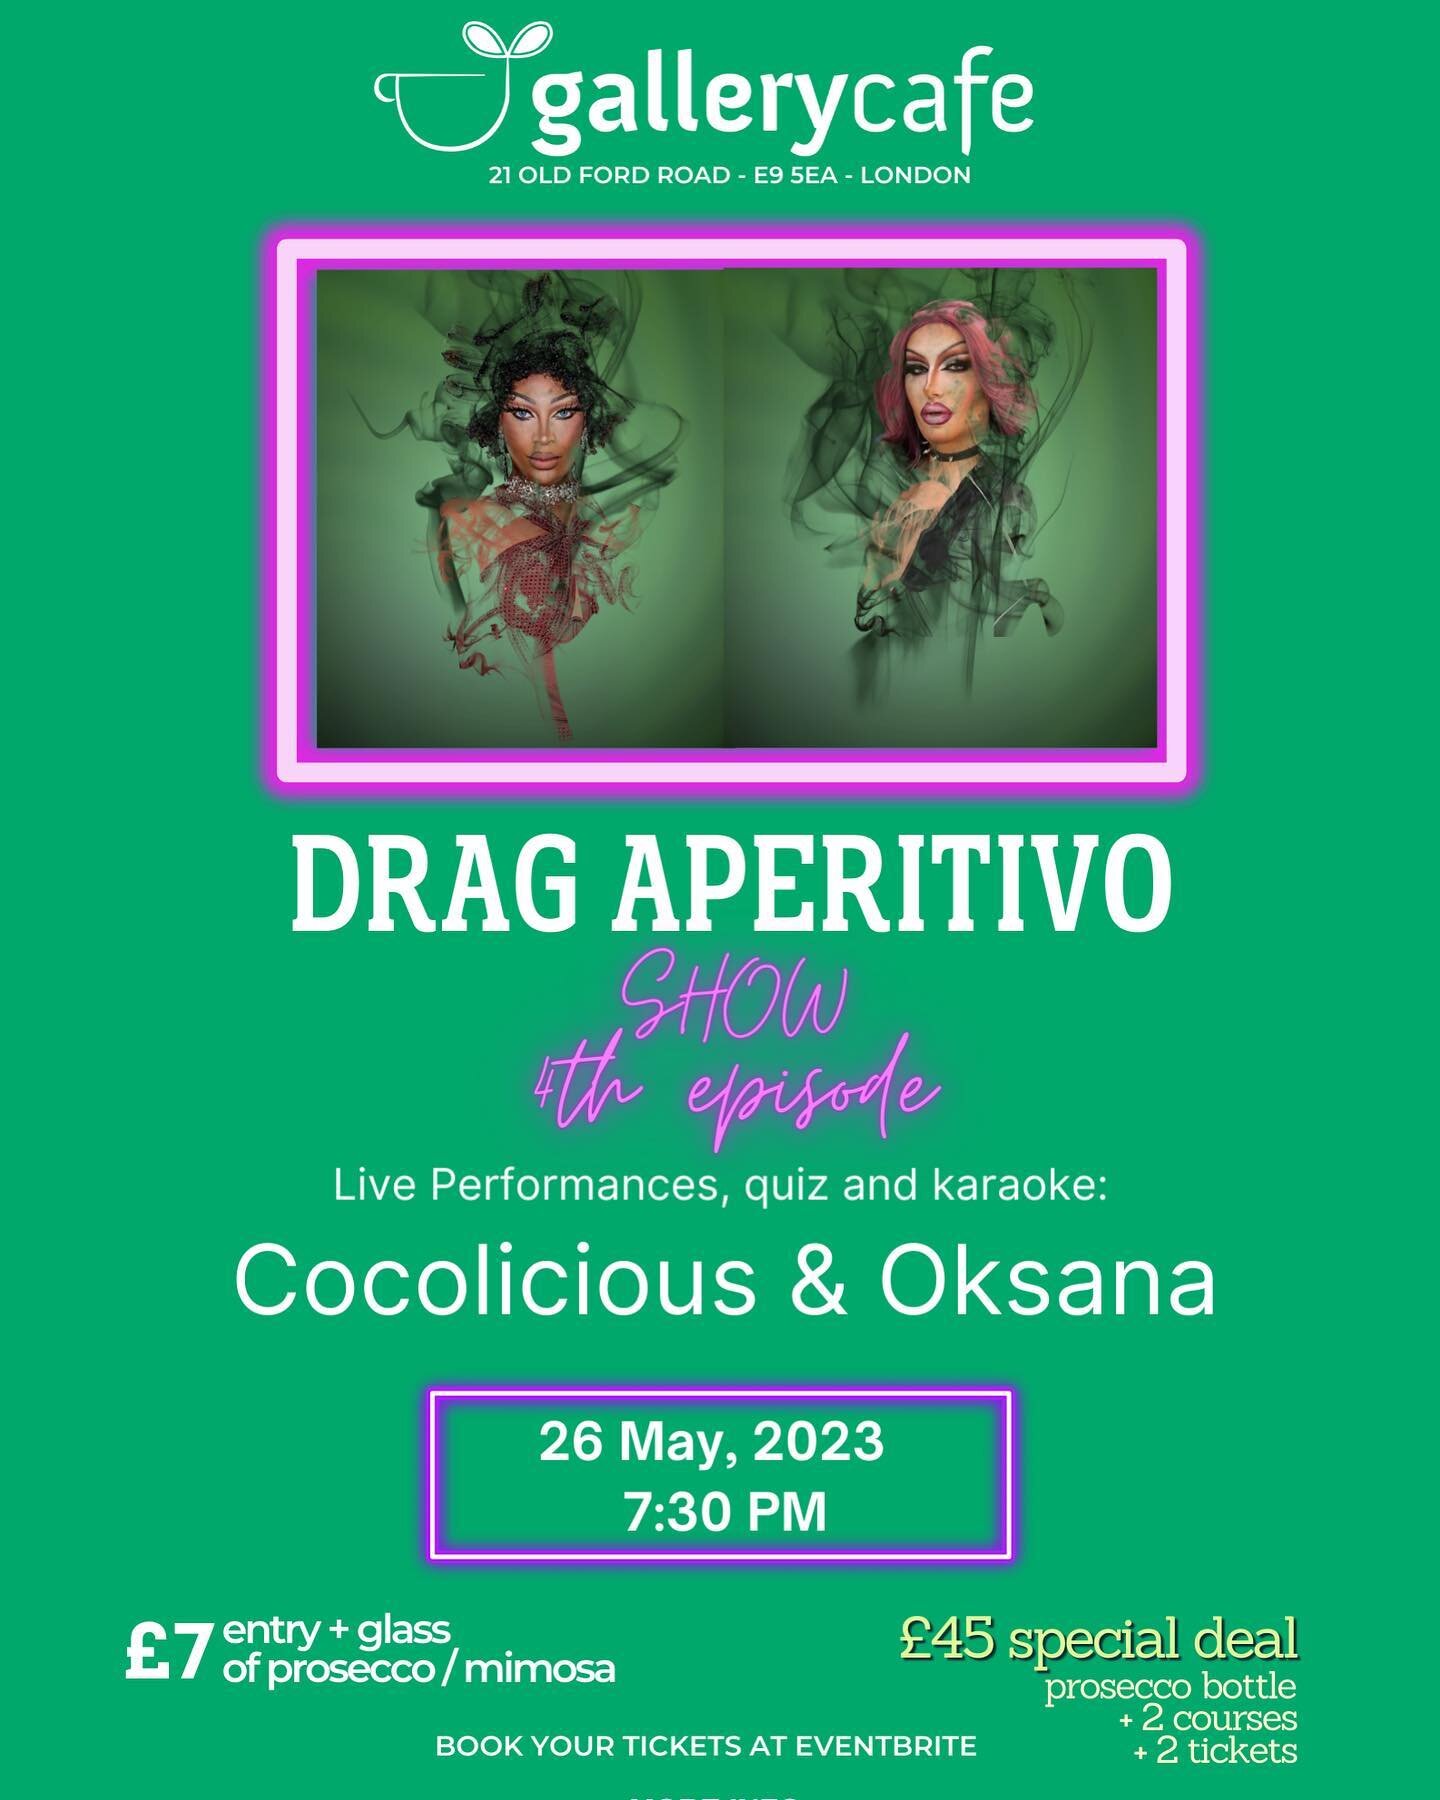 Drag Aperitivo at The Gallery Caf&eacute; !4th episode!💗👠🪩
O�ur splendid drag queens Oksana Delvey, the Queen who came all the way from Poland, and Cocolicious, The French Drag Diva, are going to share sparkling energy with live performances, kara